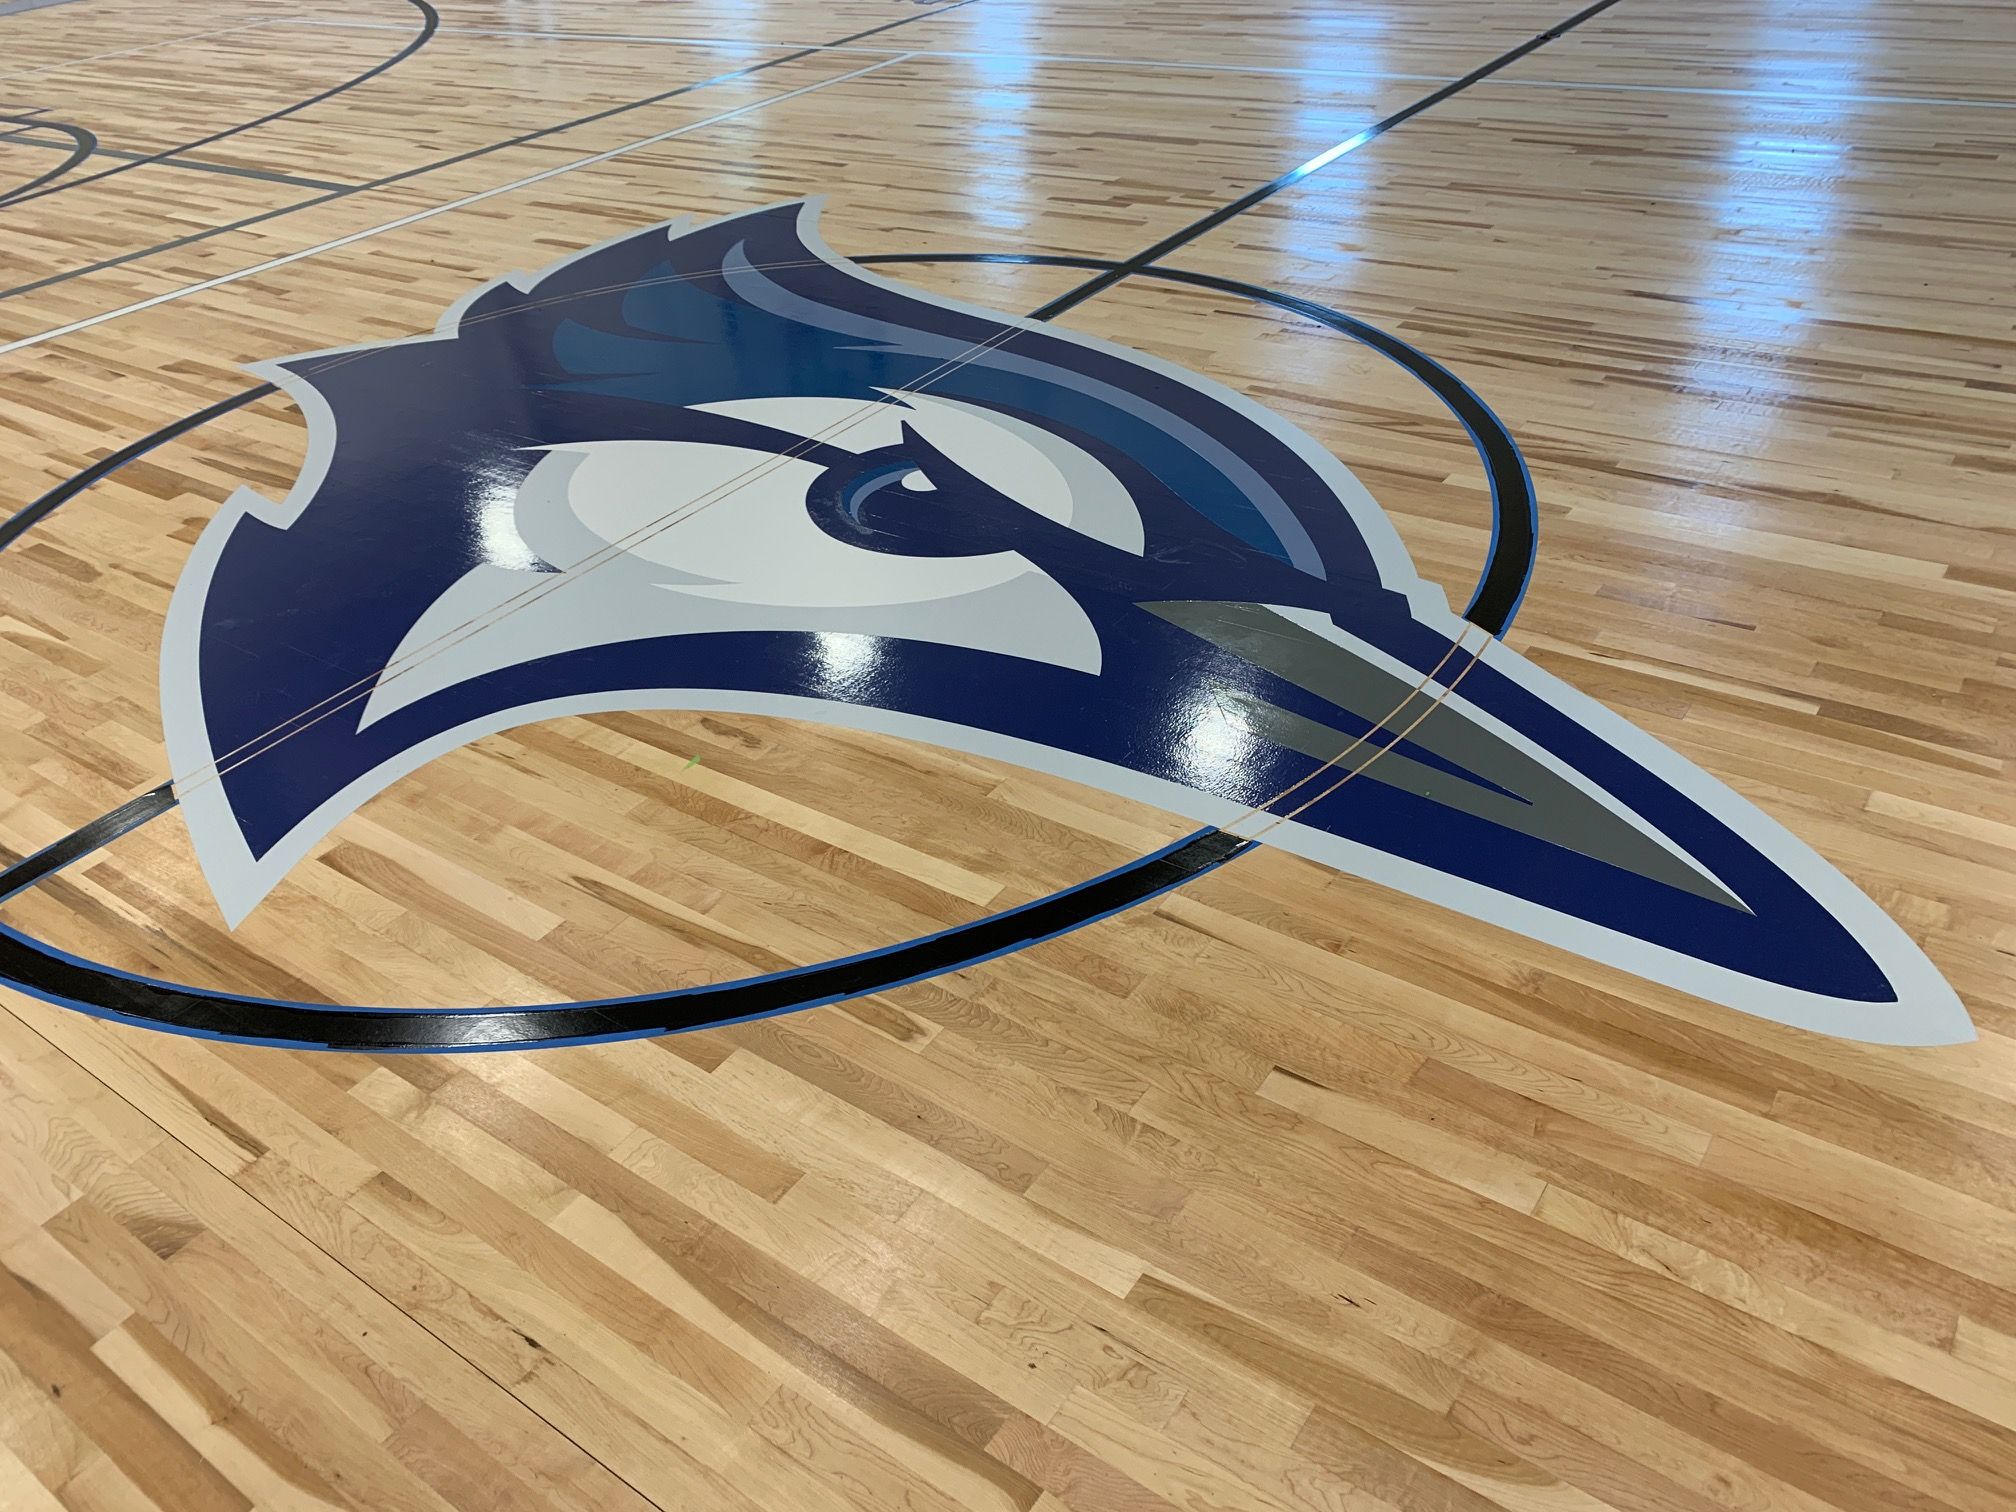 Our Lady of Mercy Gym Floor